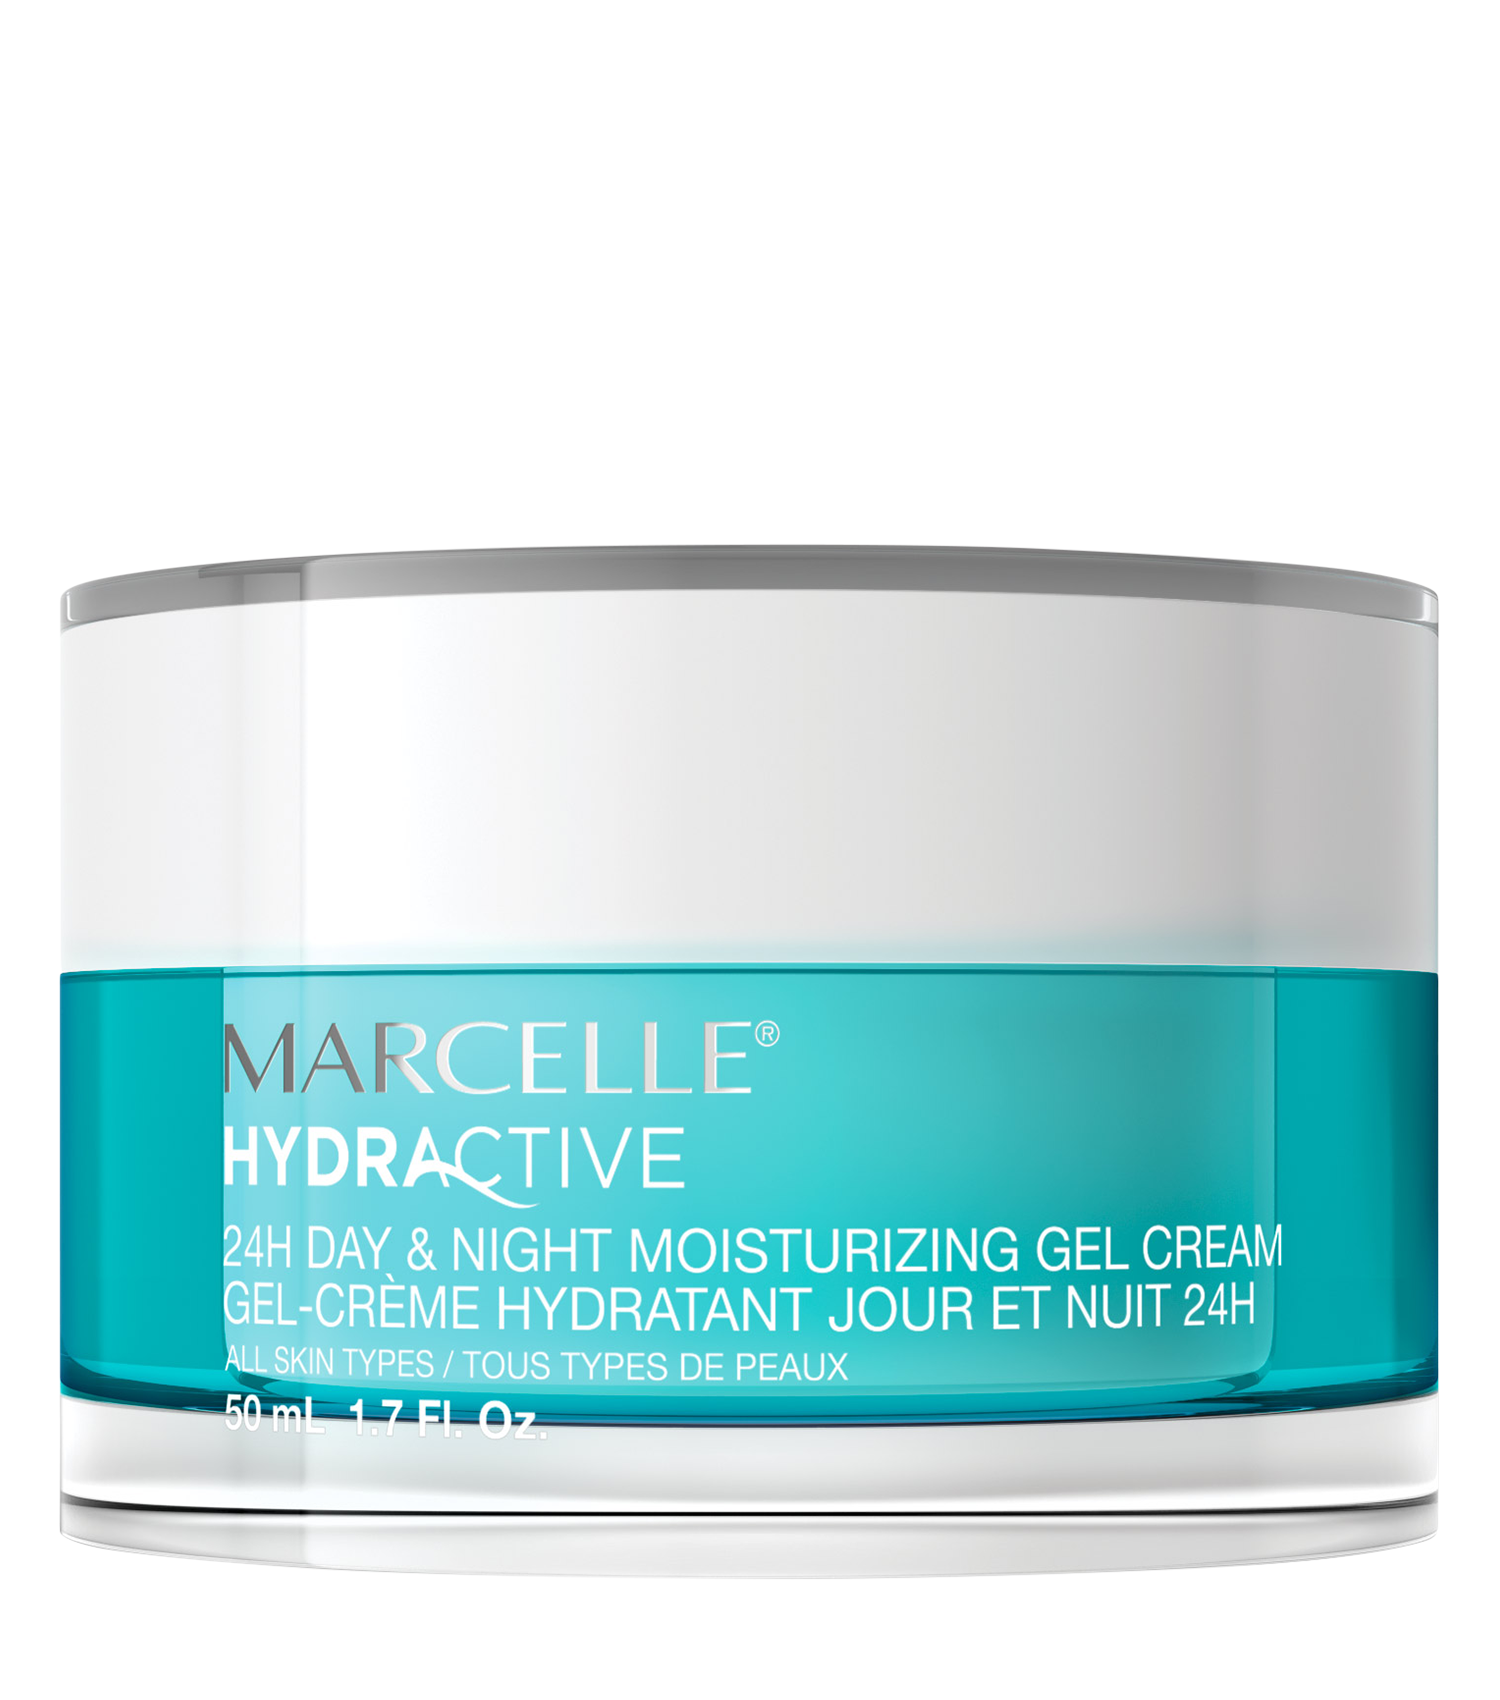 Marcelle Hydractive 24H Day & Night Moisturizing Gel Cream - All Skin Types 50mL HydraActive 24H Day & Night Moisturizing Gel Cream - All Skin Types - 7ml 1